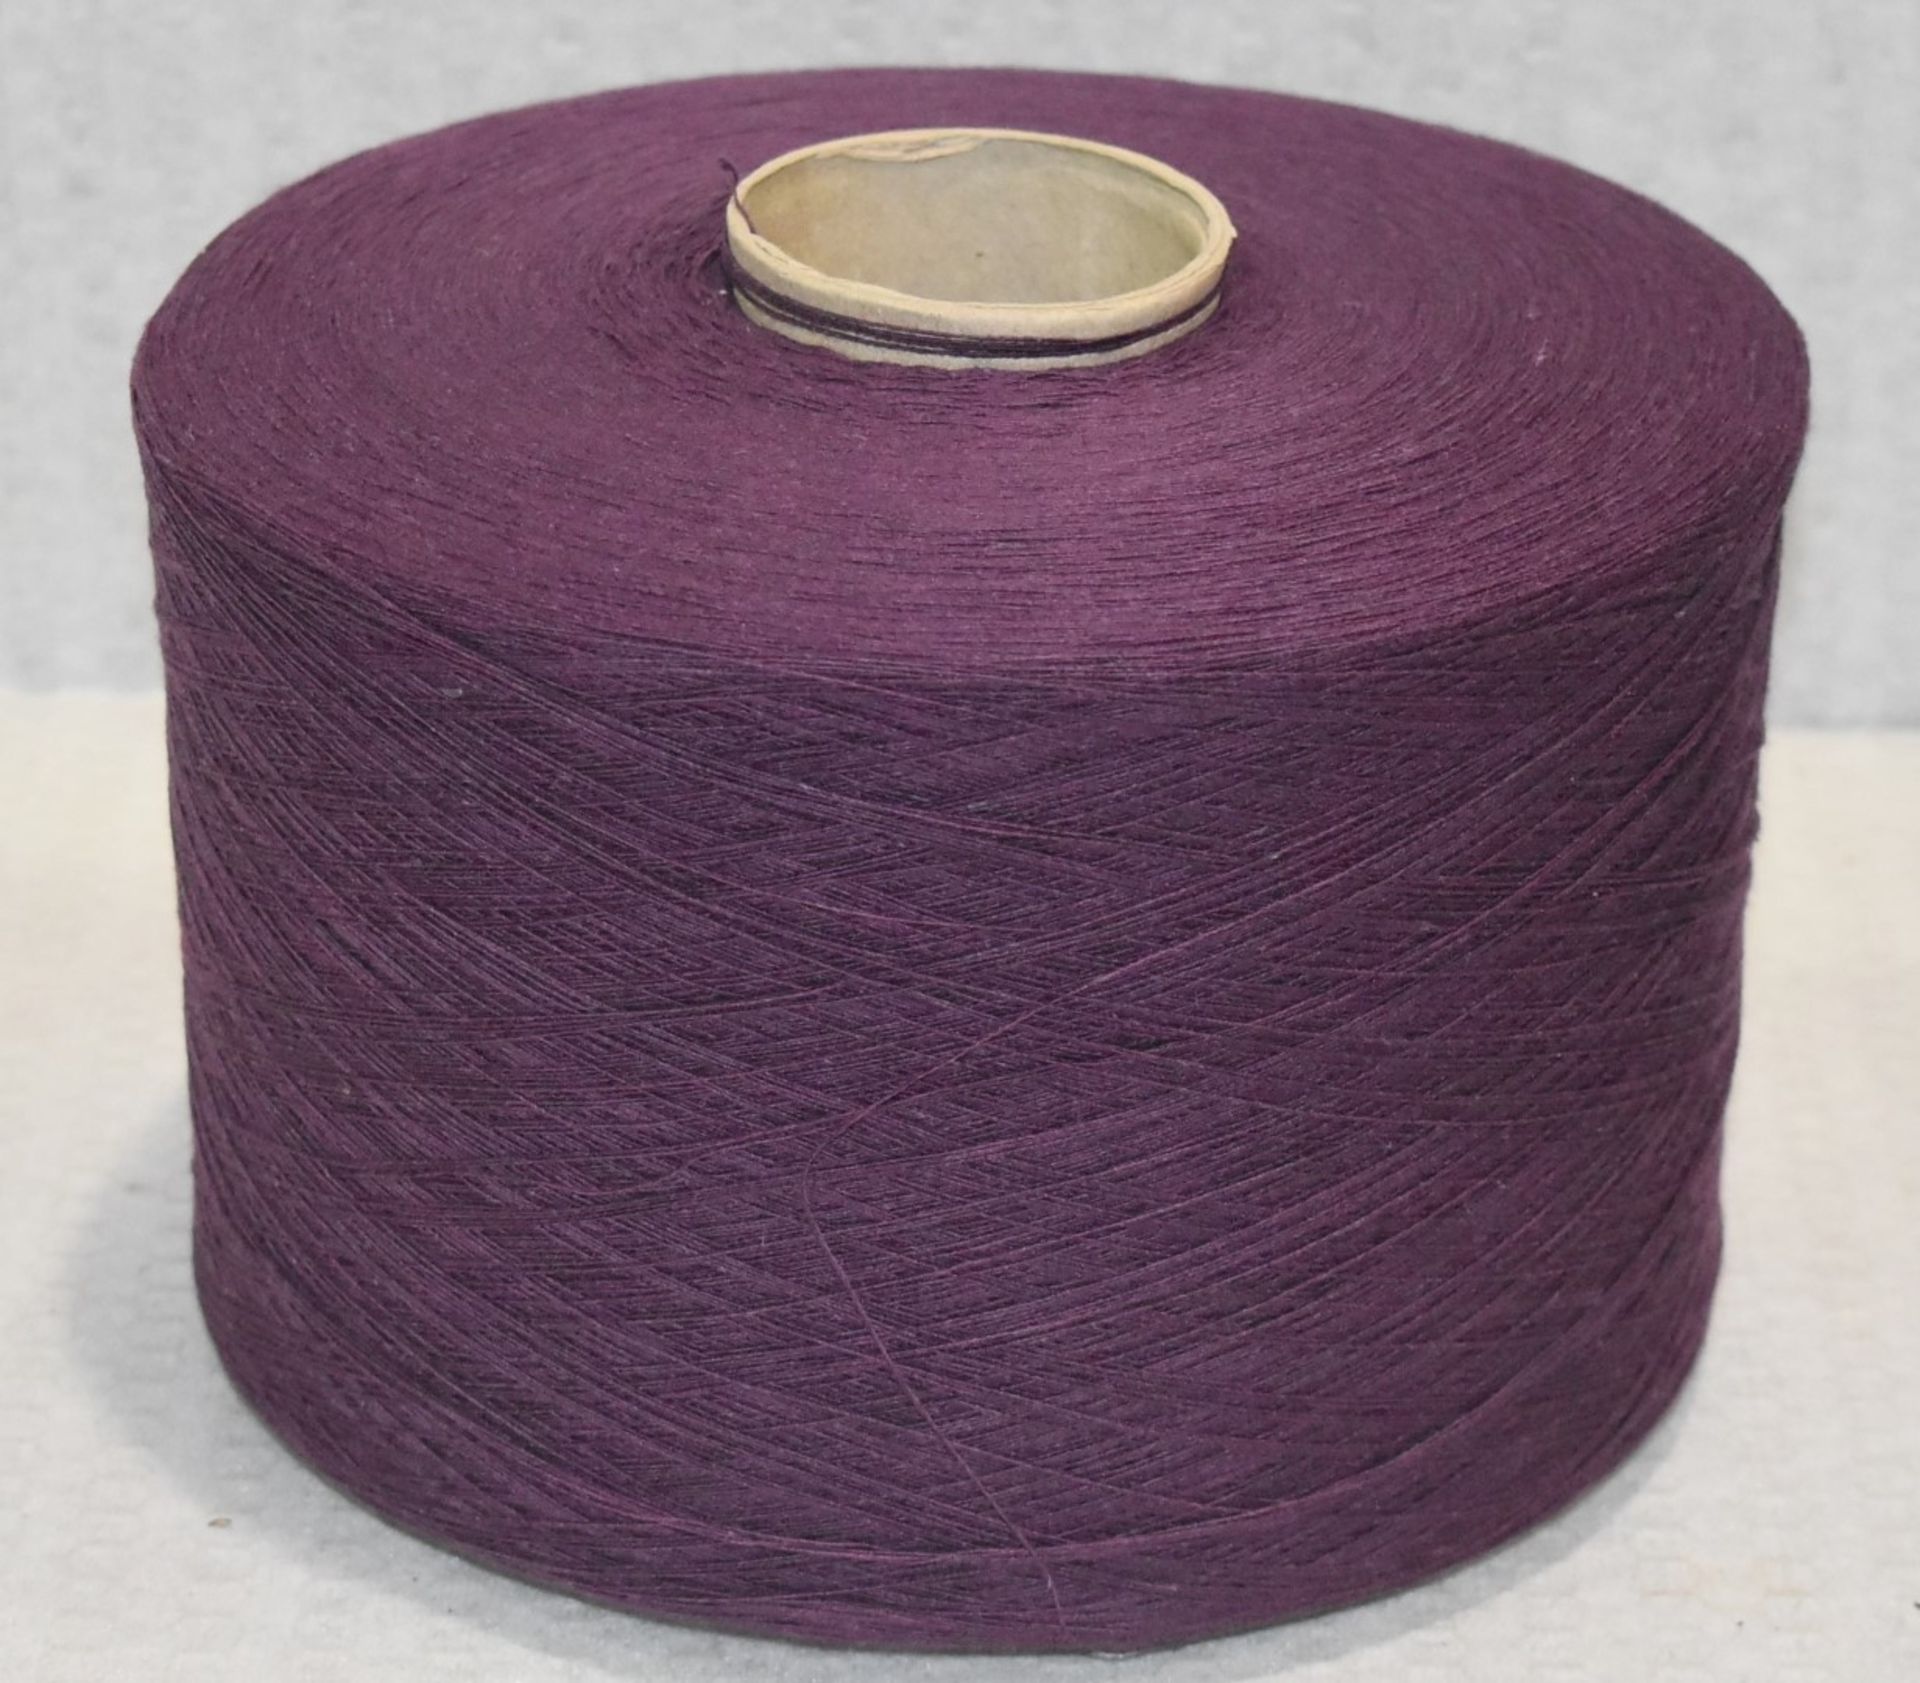 1 x Cone of 1/13 MicroCotton Knitting Yarn - Purple - Approx Weight: 2,300g - New Stock ABL Yarn - Image 2 of 10